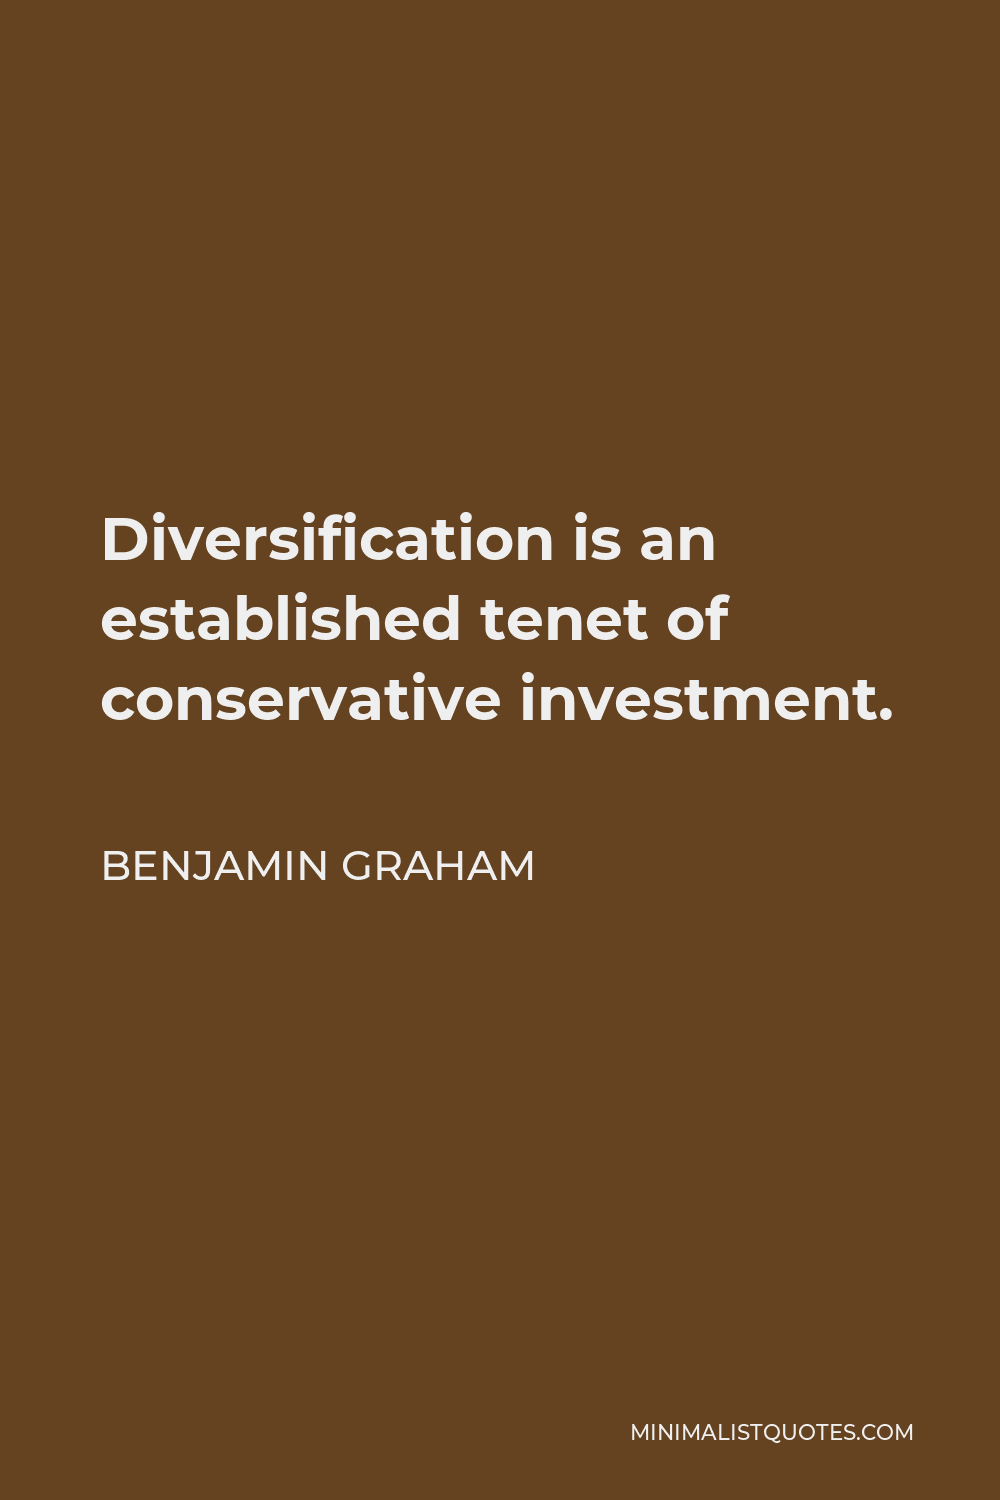 Benjamin Graham Quote - Diversification is an established tenet of conservative investment.